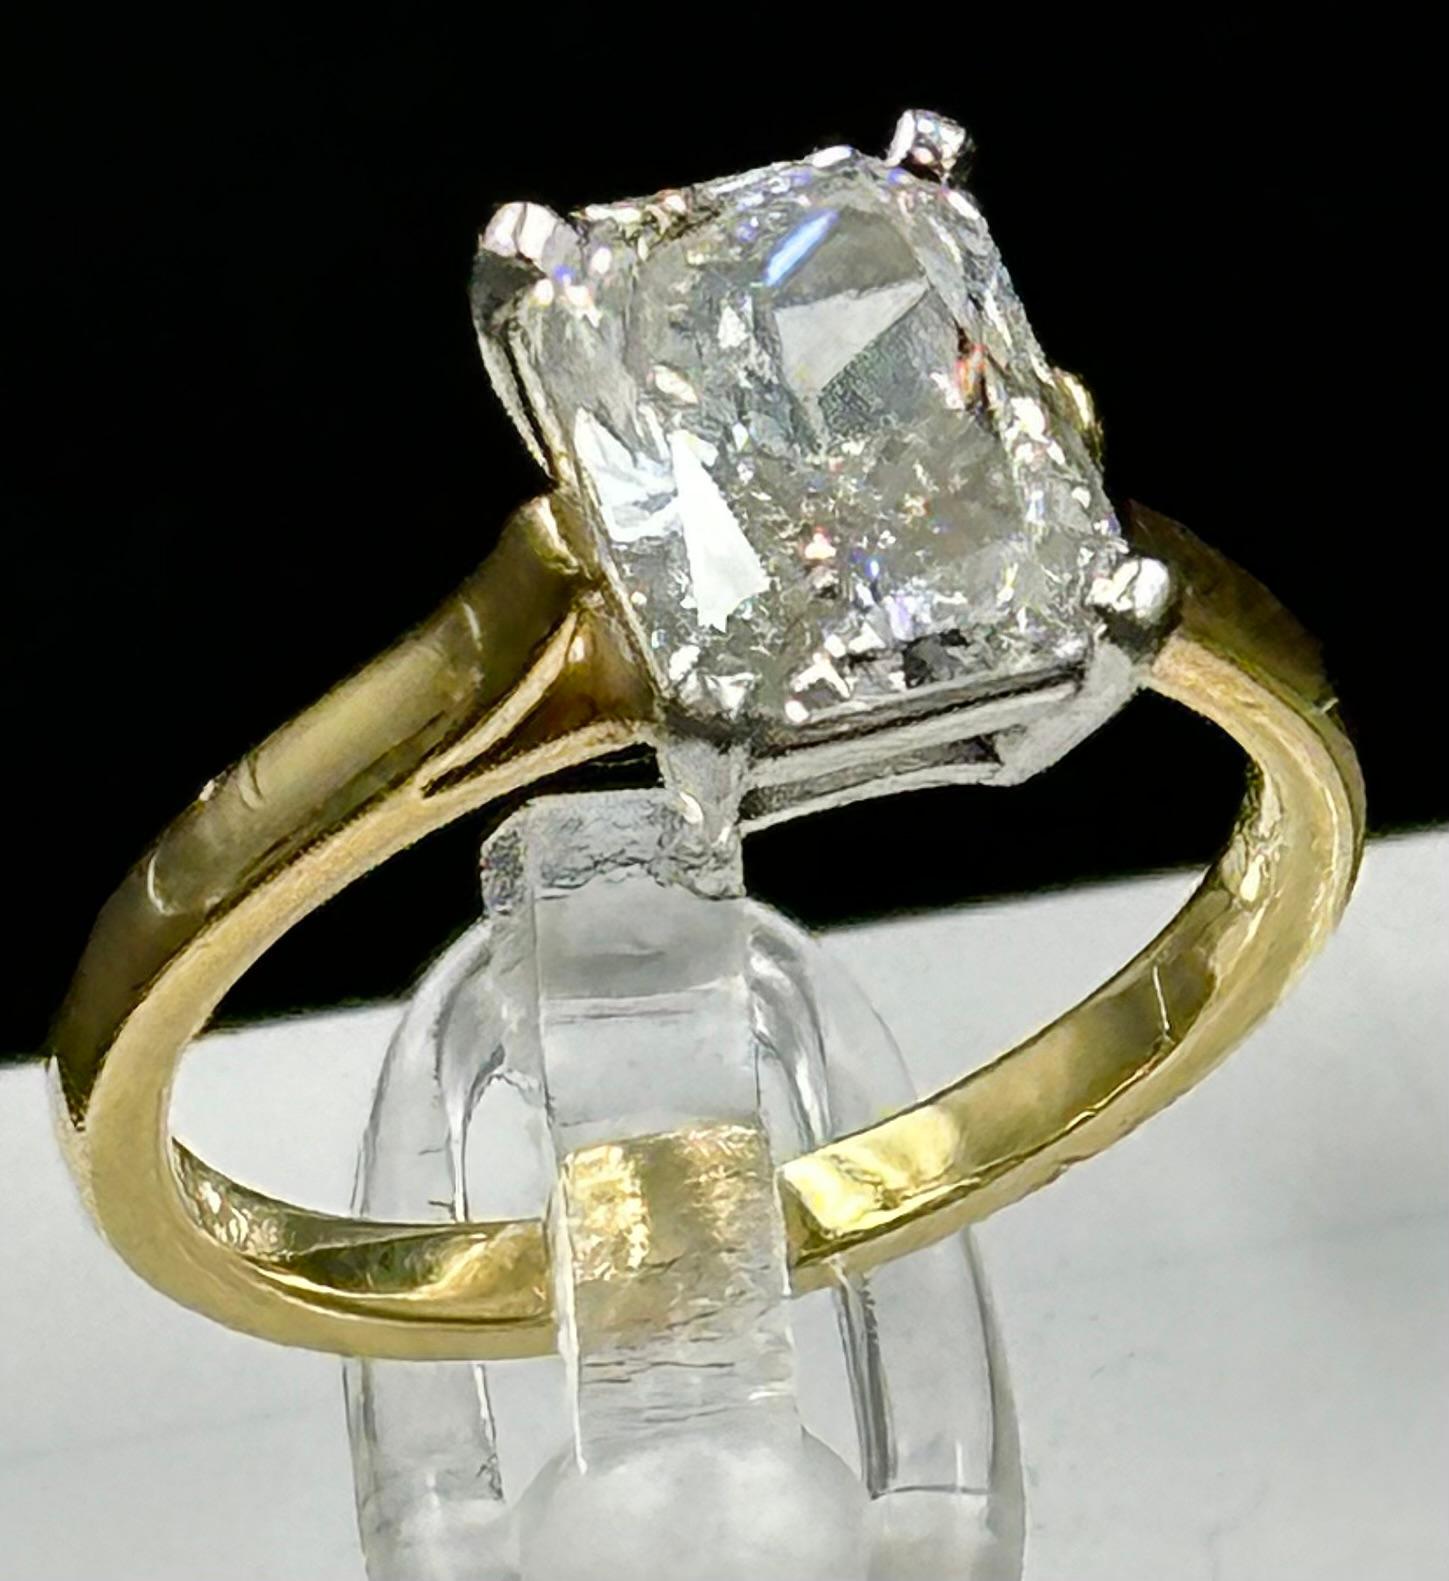 2.10ct Cushion cut diamond solitaire ring mounted in platinum and 18ct gold. Signed Tiffany & Co. - Image 5 of 5